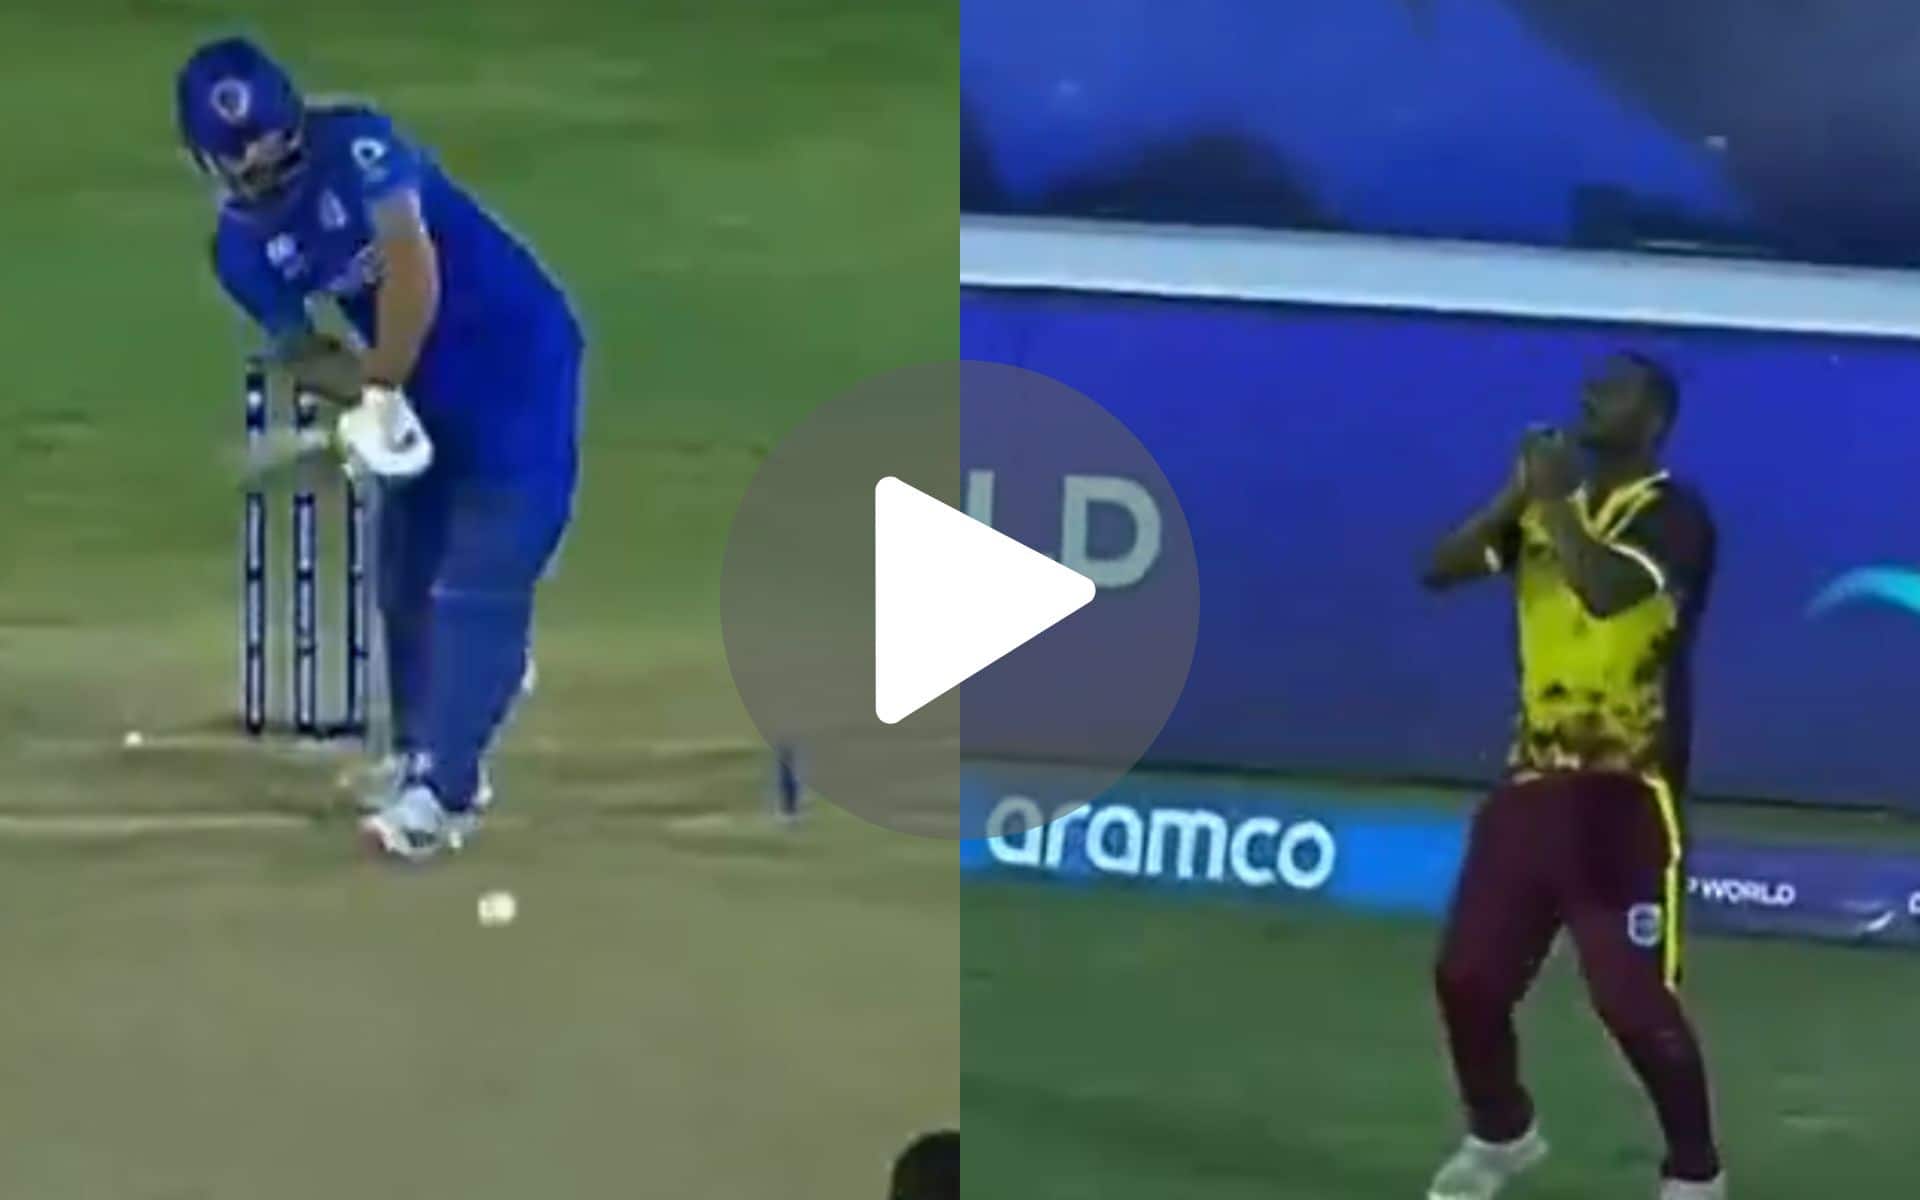 [Watch] Ibrahim Zadran's Soft Dismissal Puts AFG In Deep Trouble Vs WI in T20WC